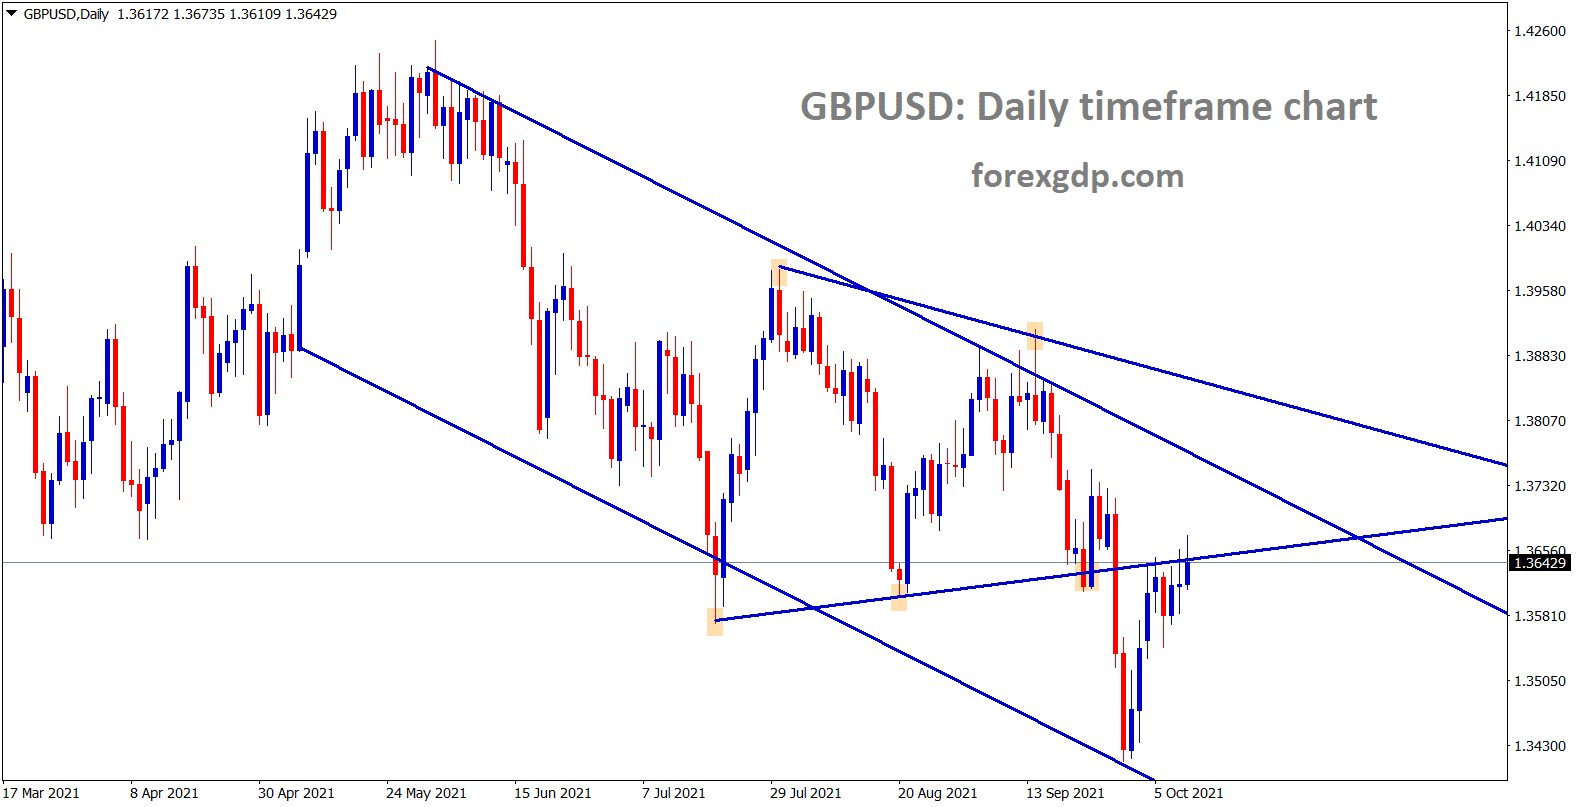 GBPUSD is consolidating at the retest area of the symmetrical triangle and its trying to move higher to the lower low of the descending channel line